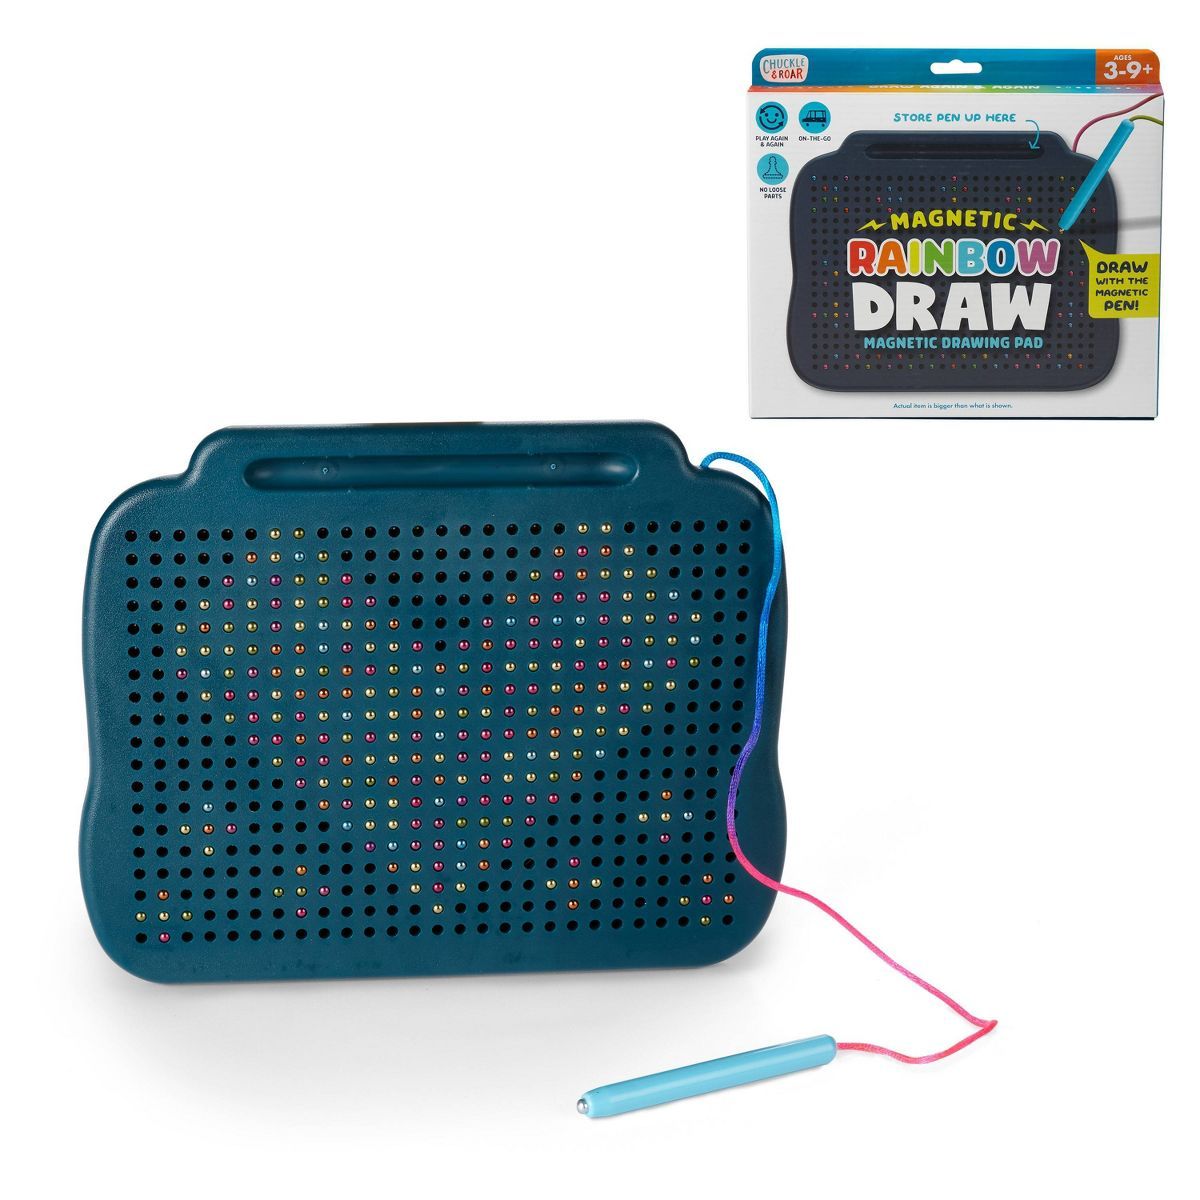 Chuckle & Roar Magnetic Rainbow Draw – Magnetic Drawing Pad | Target